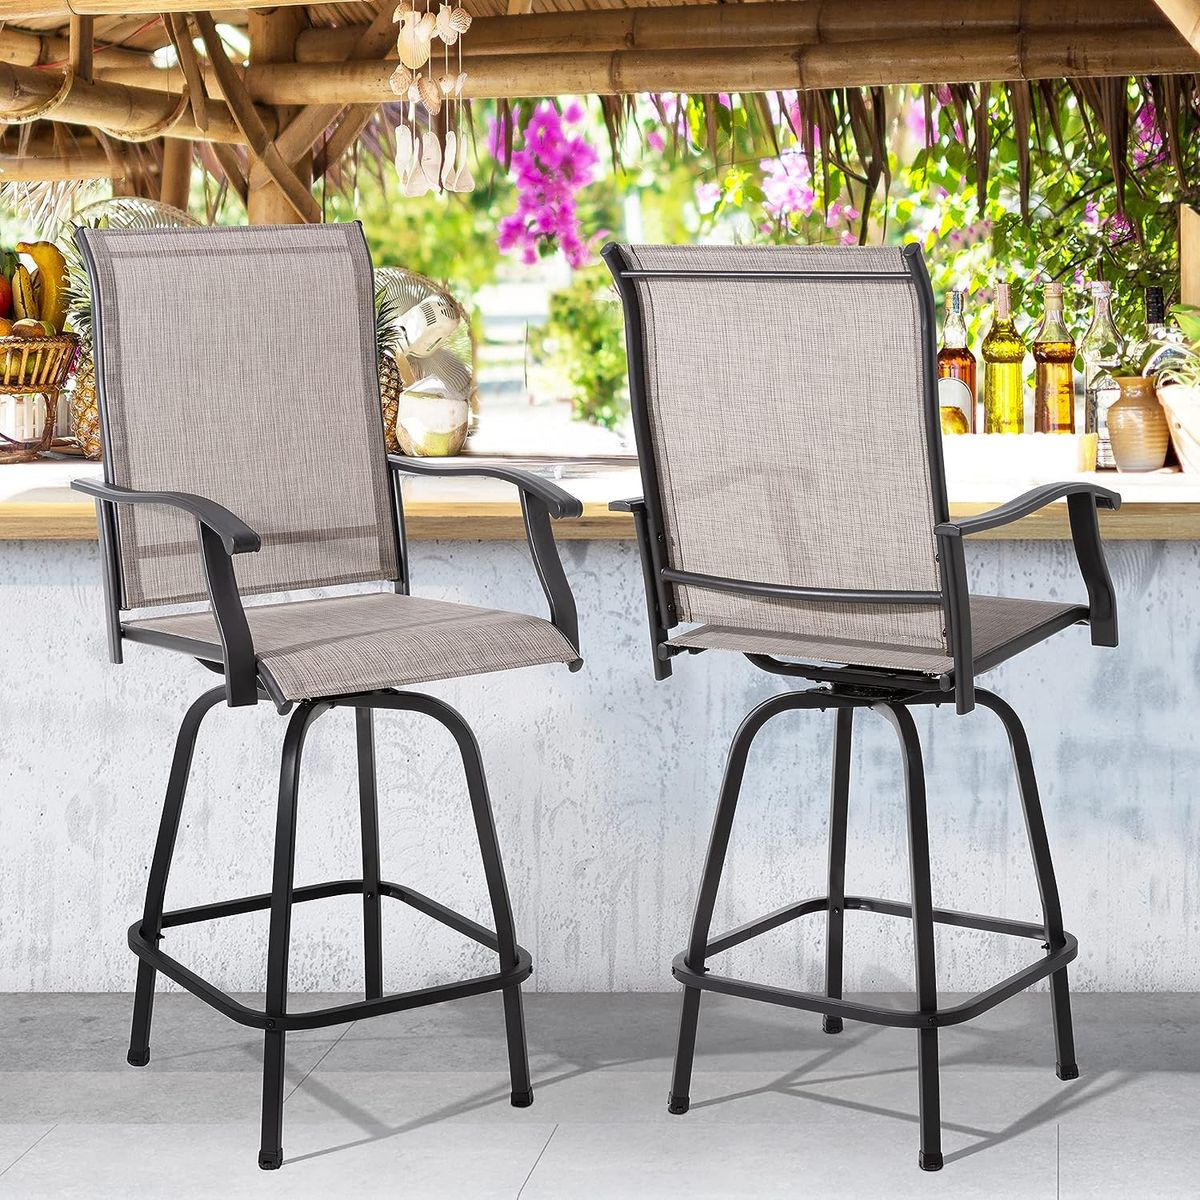 Outdoor Bar with Stools